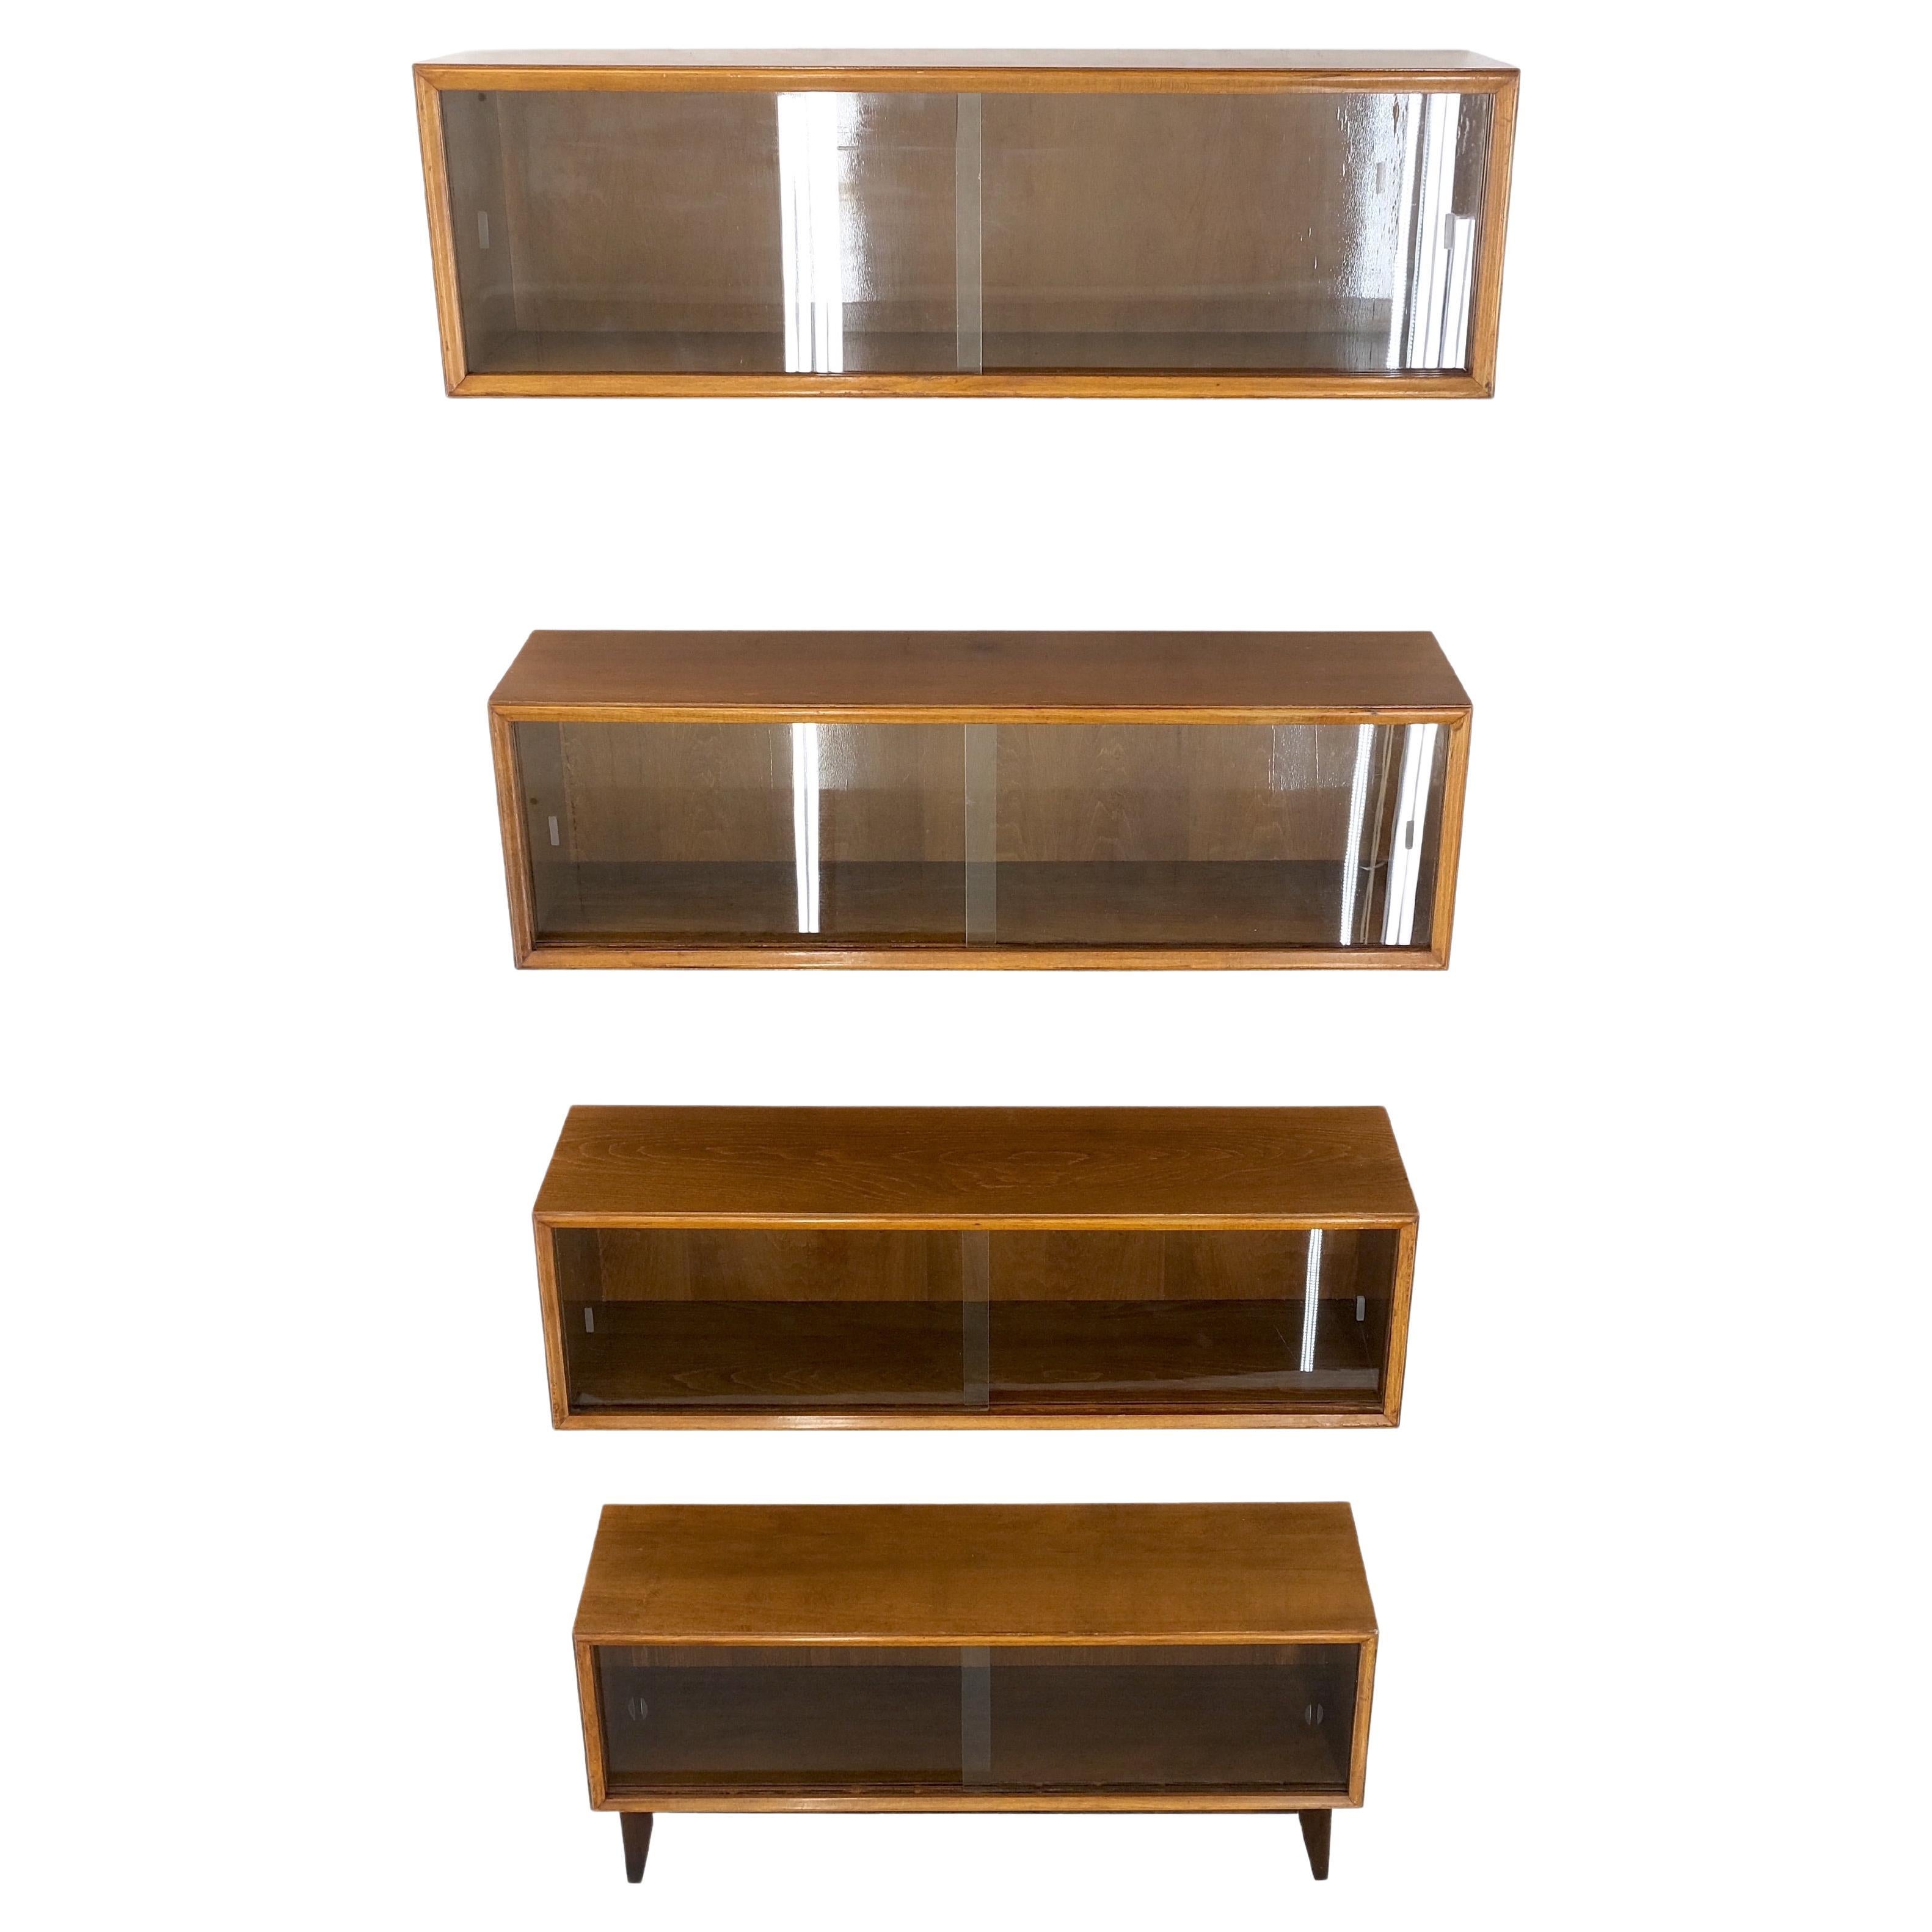 The Moderns Slide Glass Doors 4 Bays Stacking or Hanging Bookcase (Bibliothèque empilable ou suspendue)